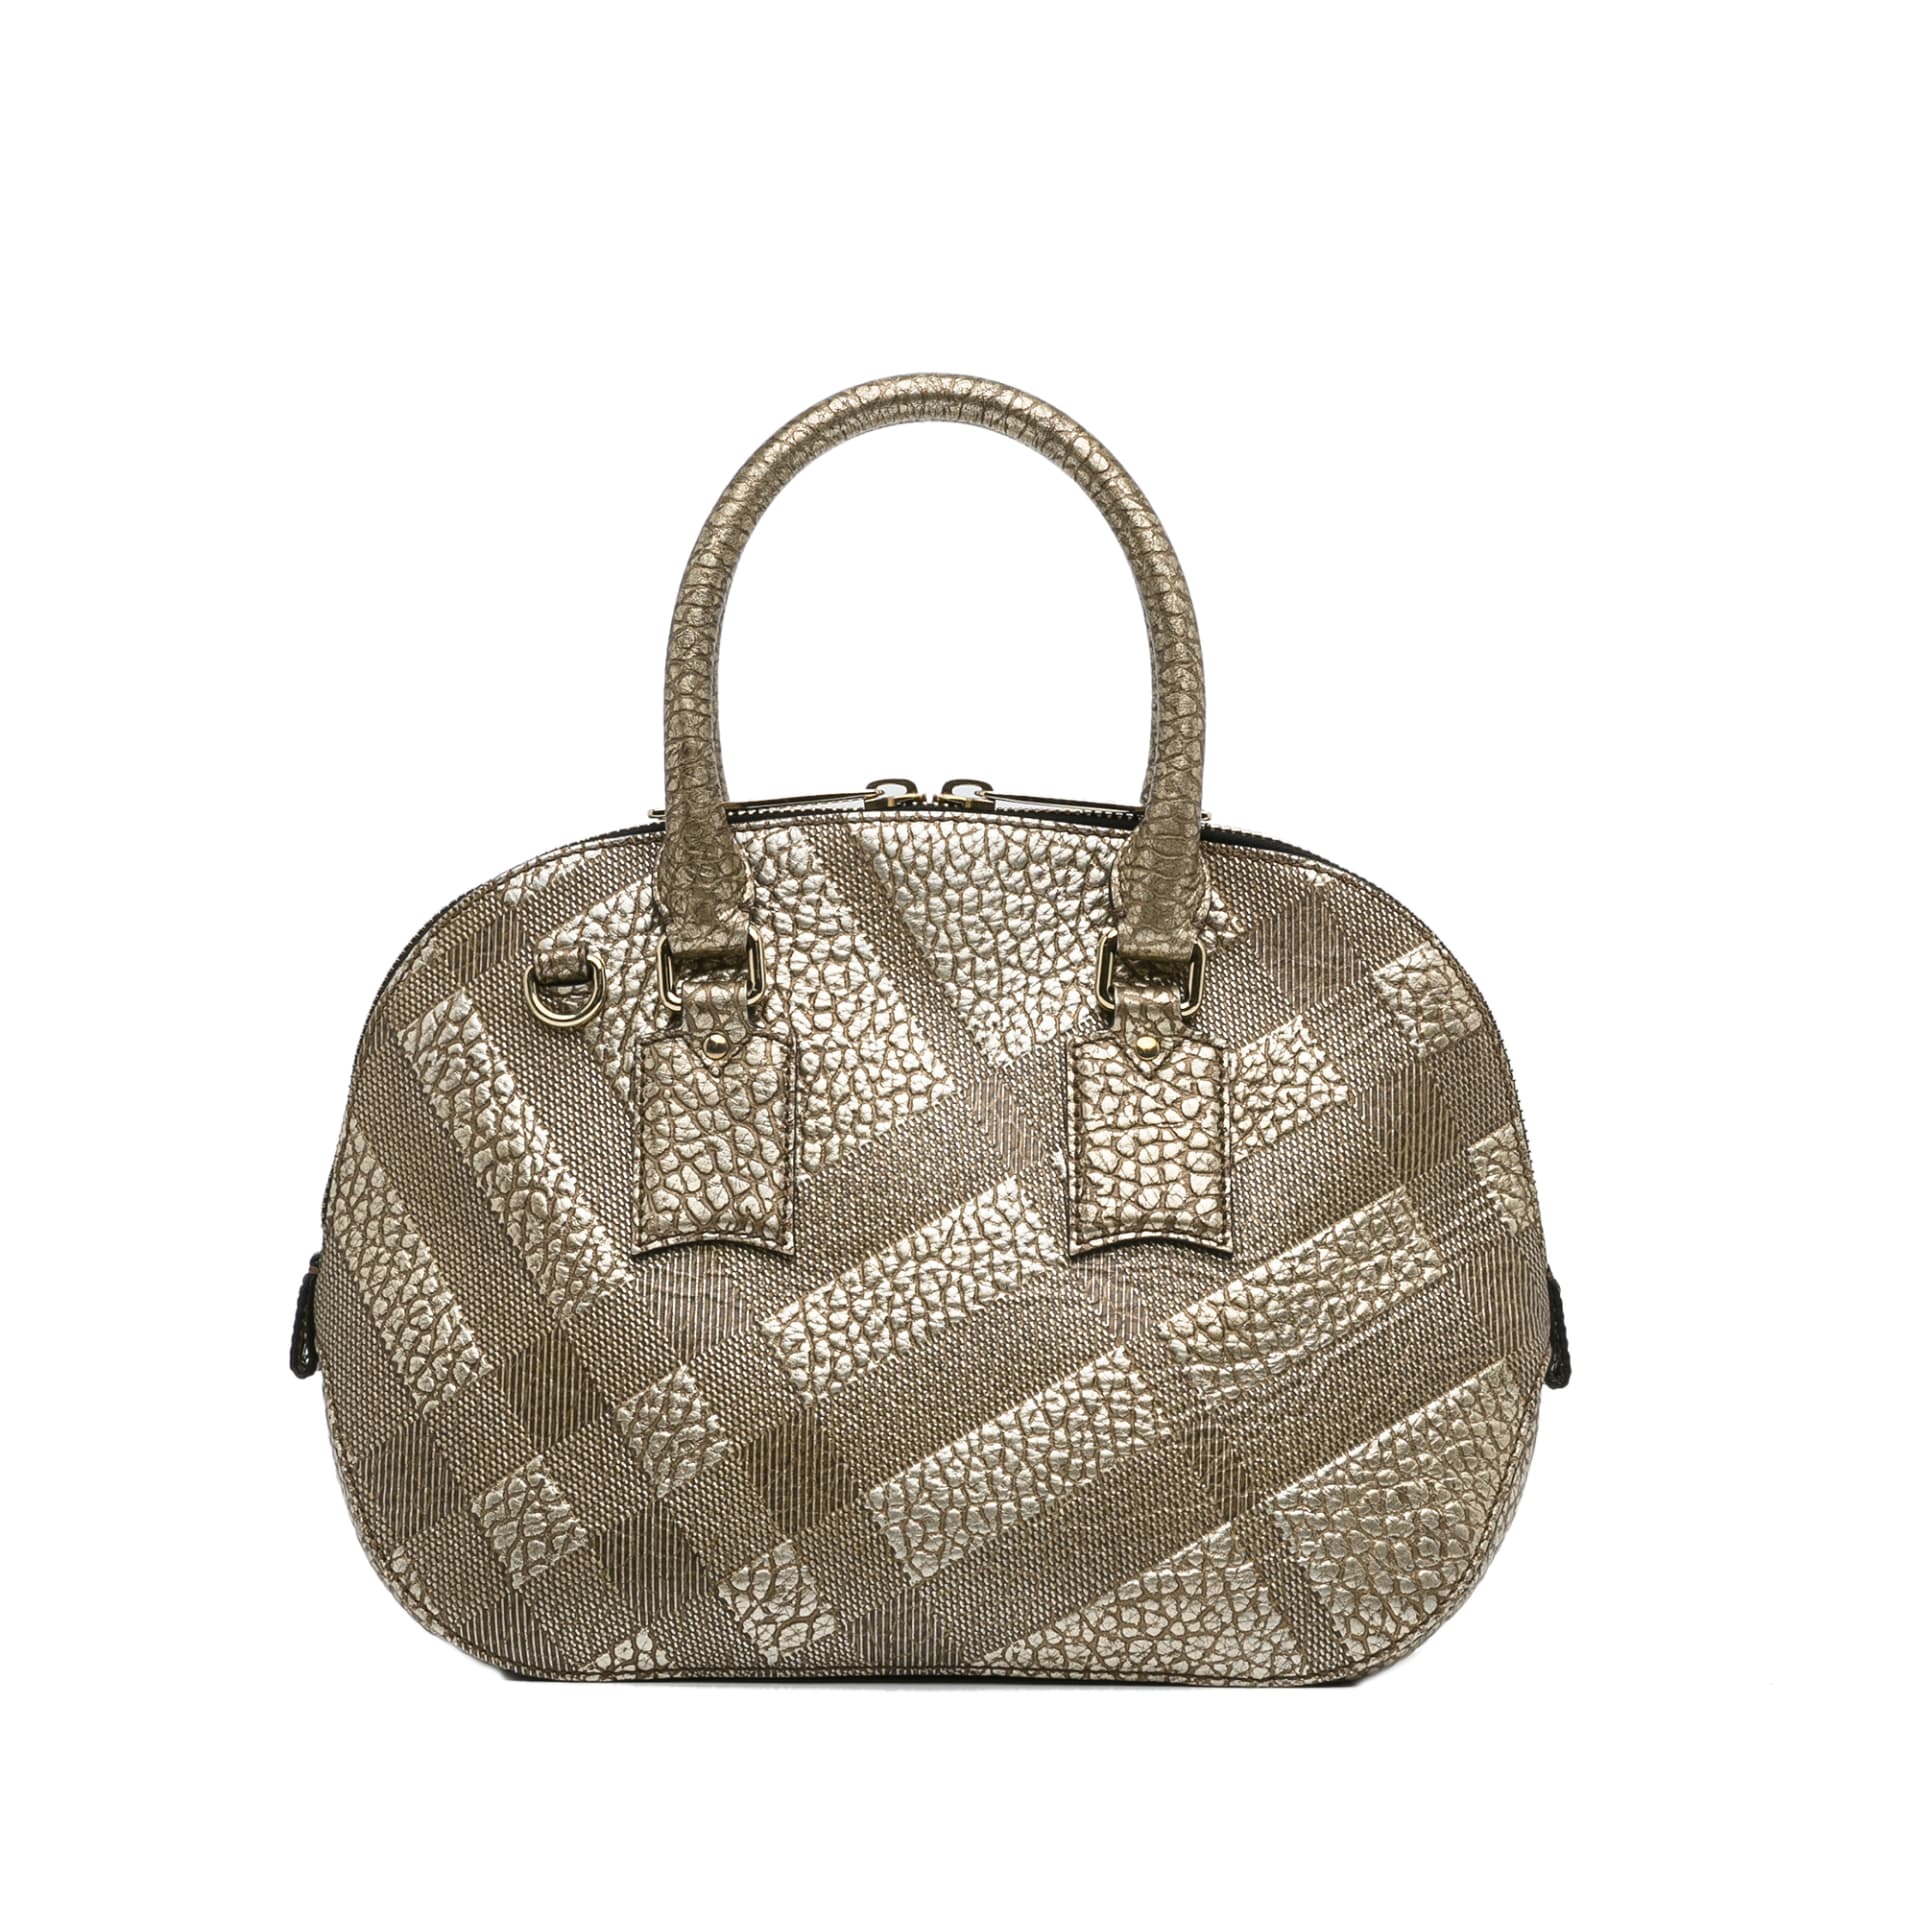 Burberry Embossed Leather Orchard Handle Bag